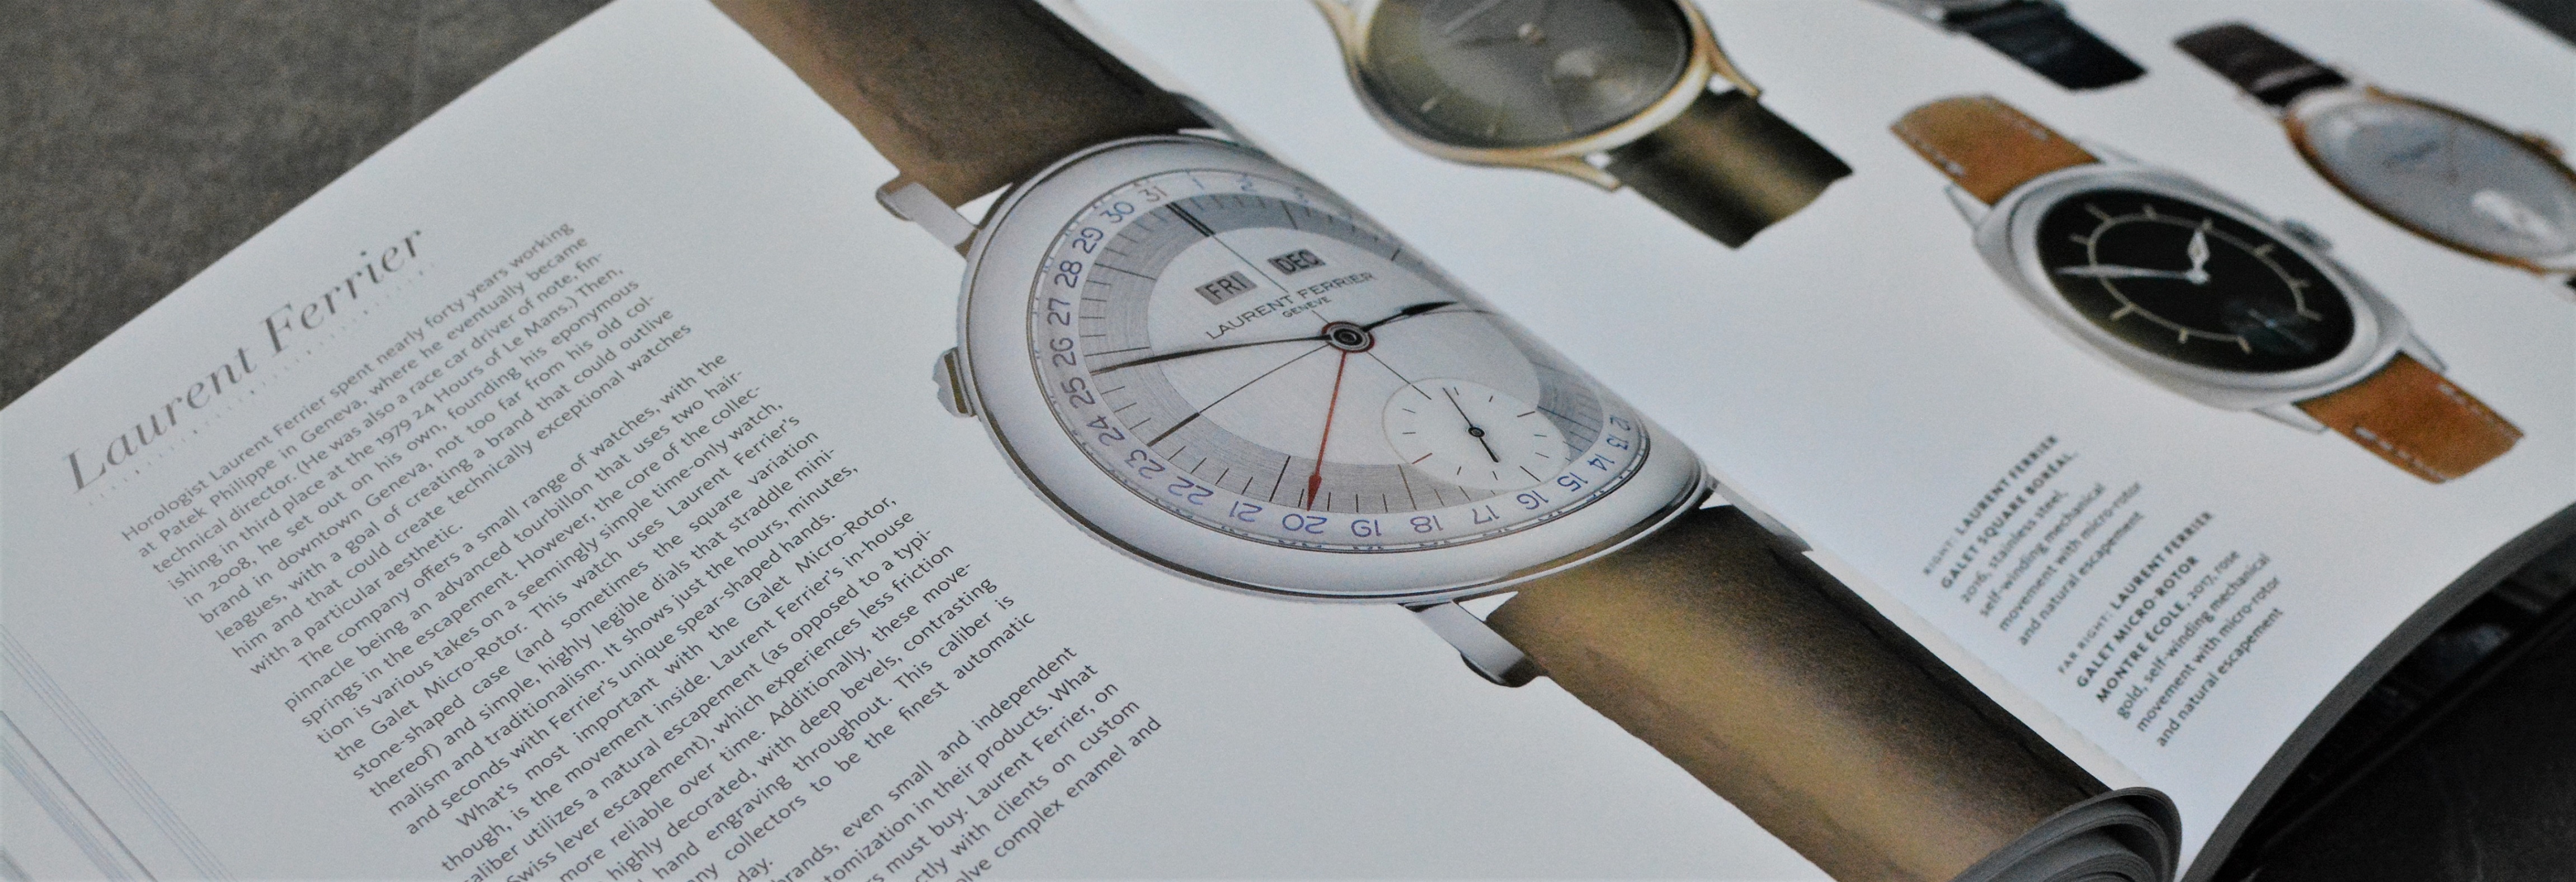 Laurent Ferrier as seen in The Watch Thoroughly Revised